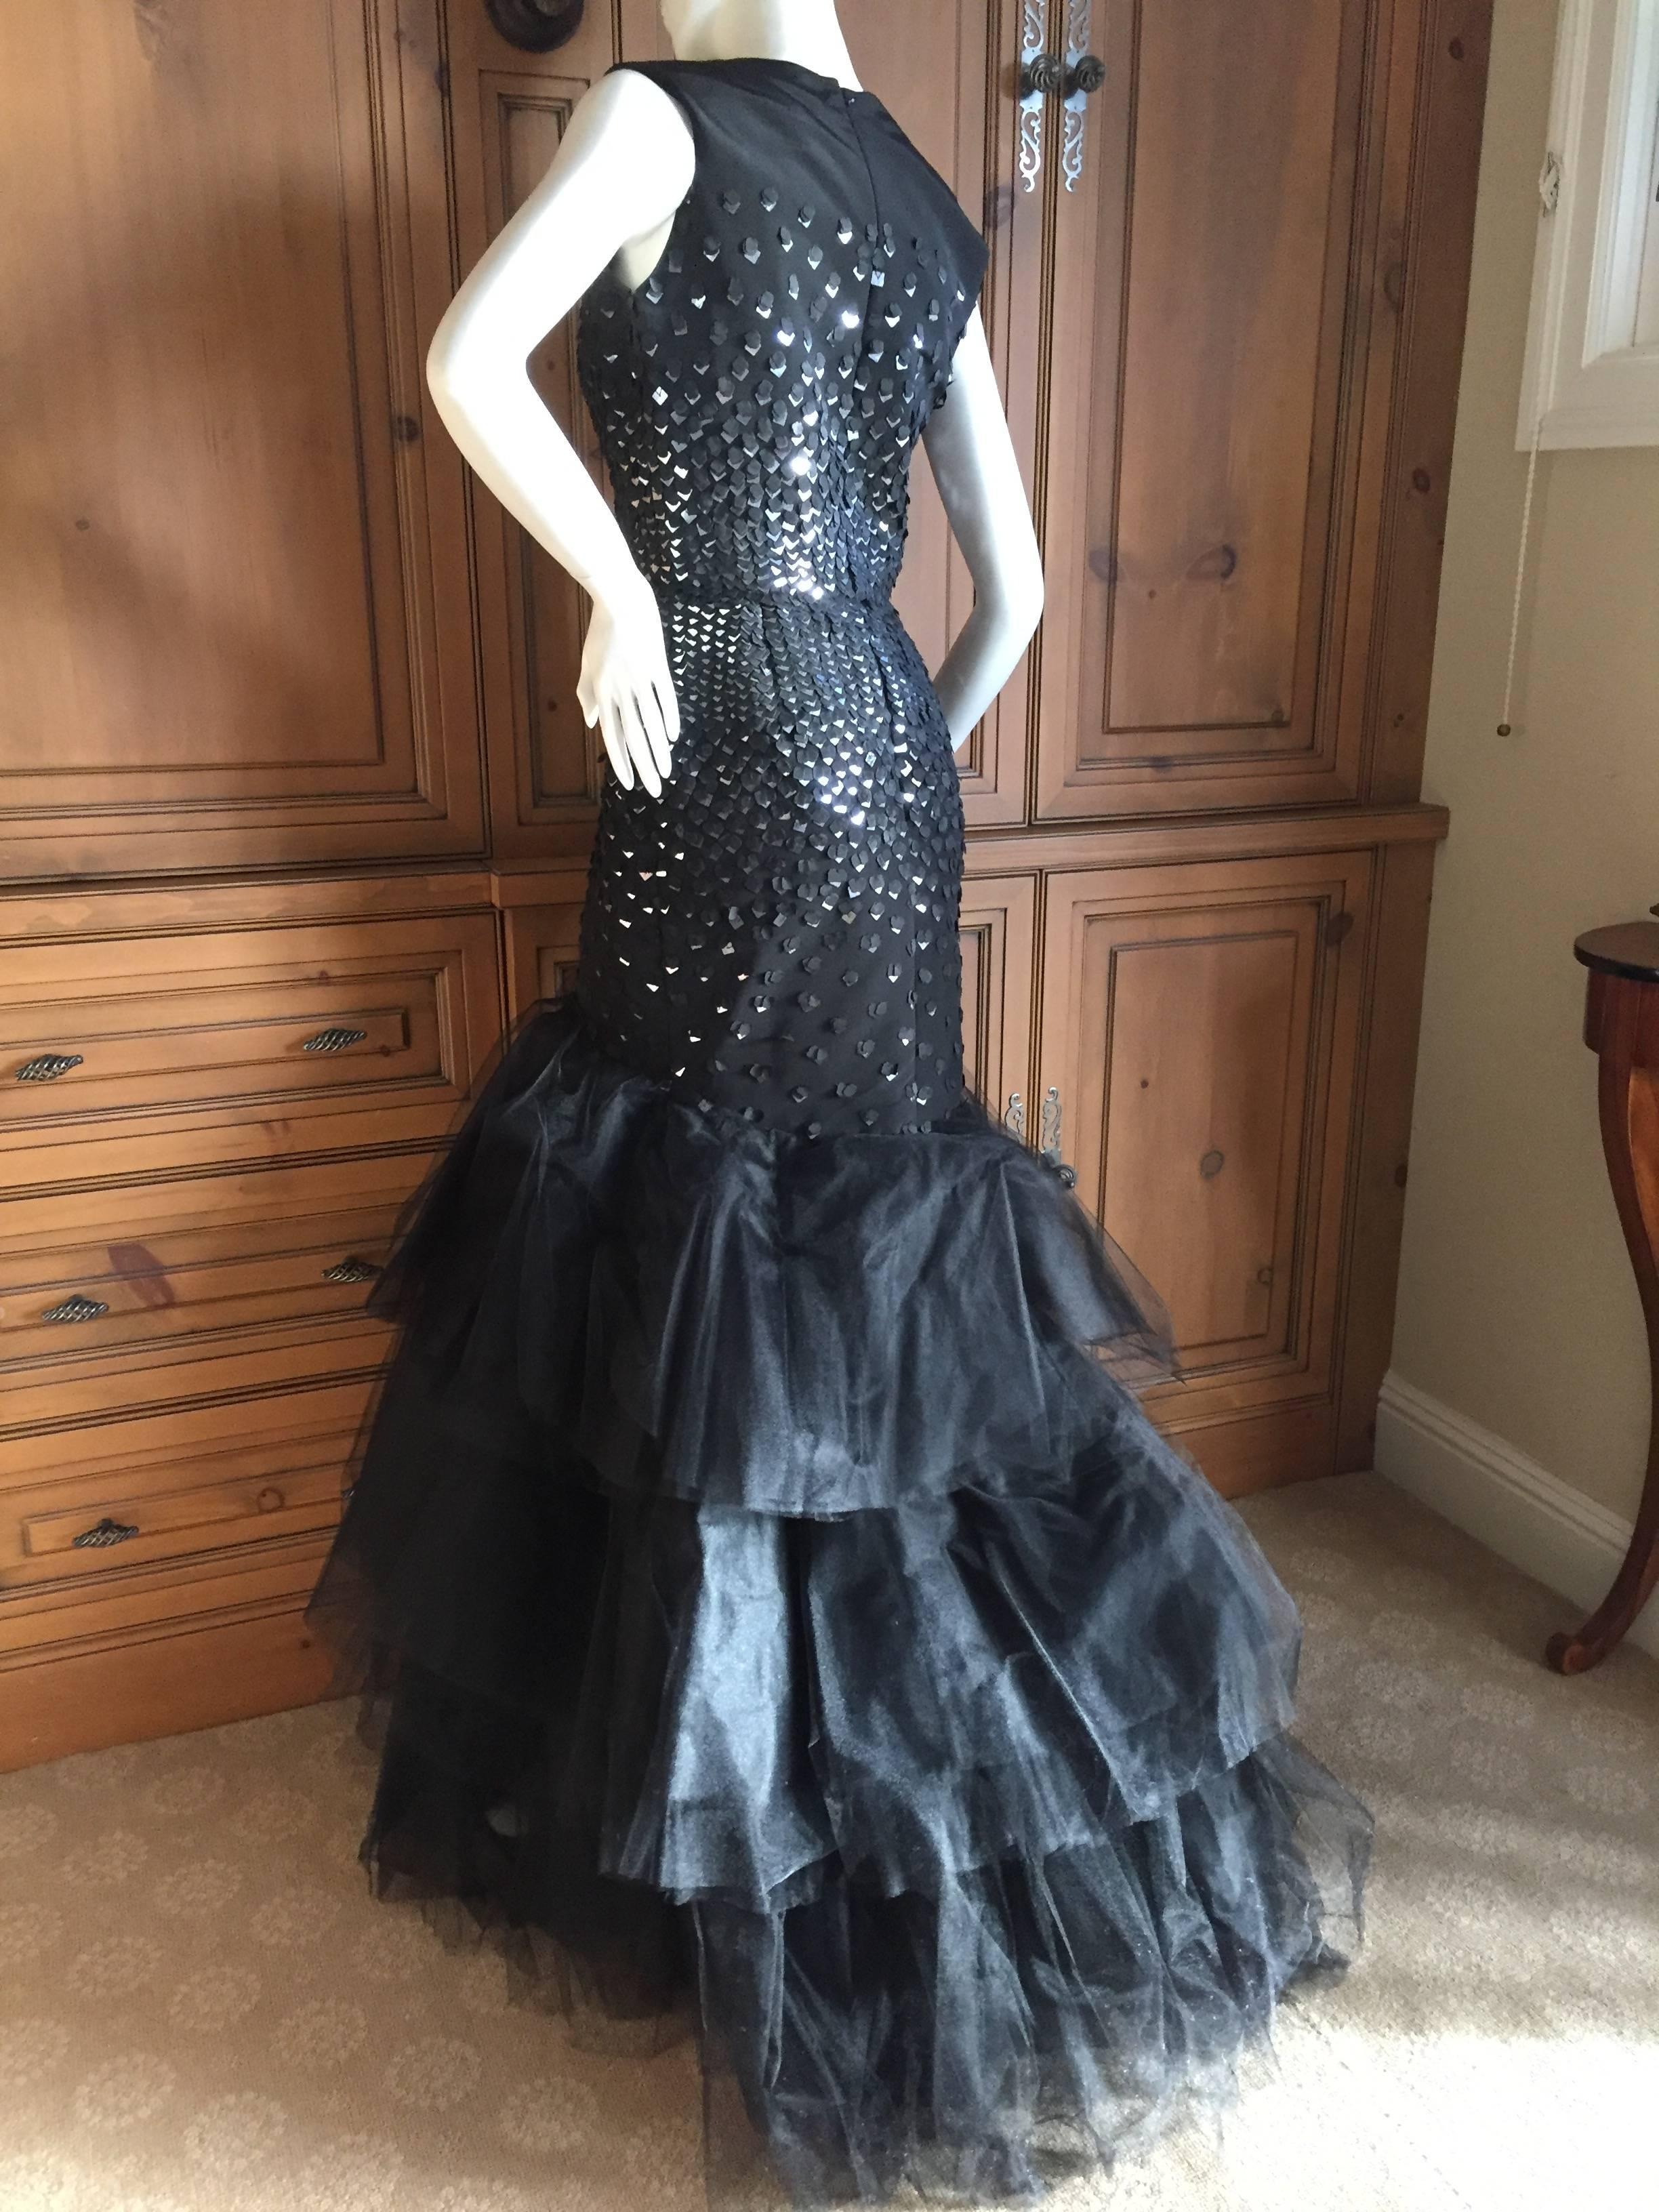 Black sequin mermaid gown from Oscar de la Renta.
Featuring a sleeveless sheath with fish scale style sequins in silver and black, and a wonderful layered tulle mermaid skirt. 
Beautiful entrance and exit maker.
Size 4
Bust 36